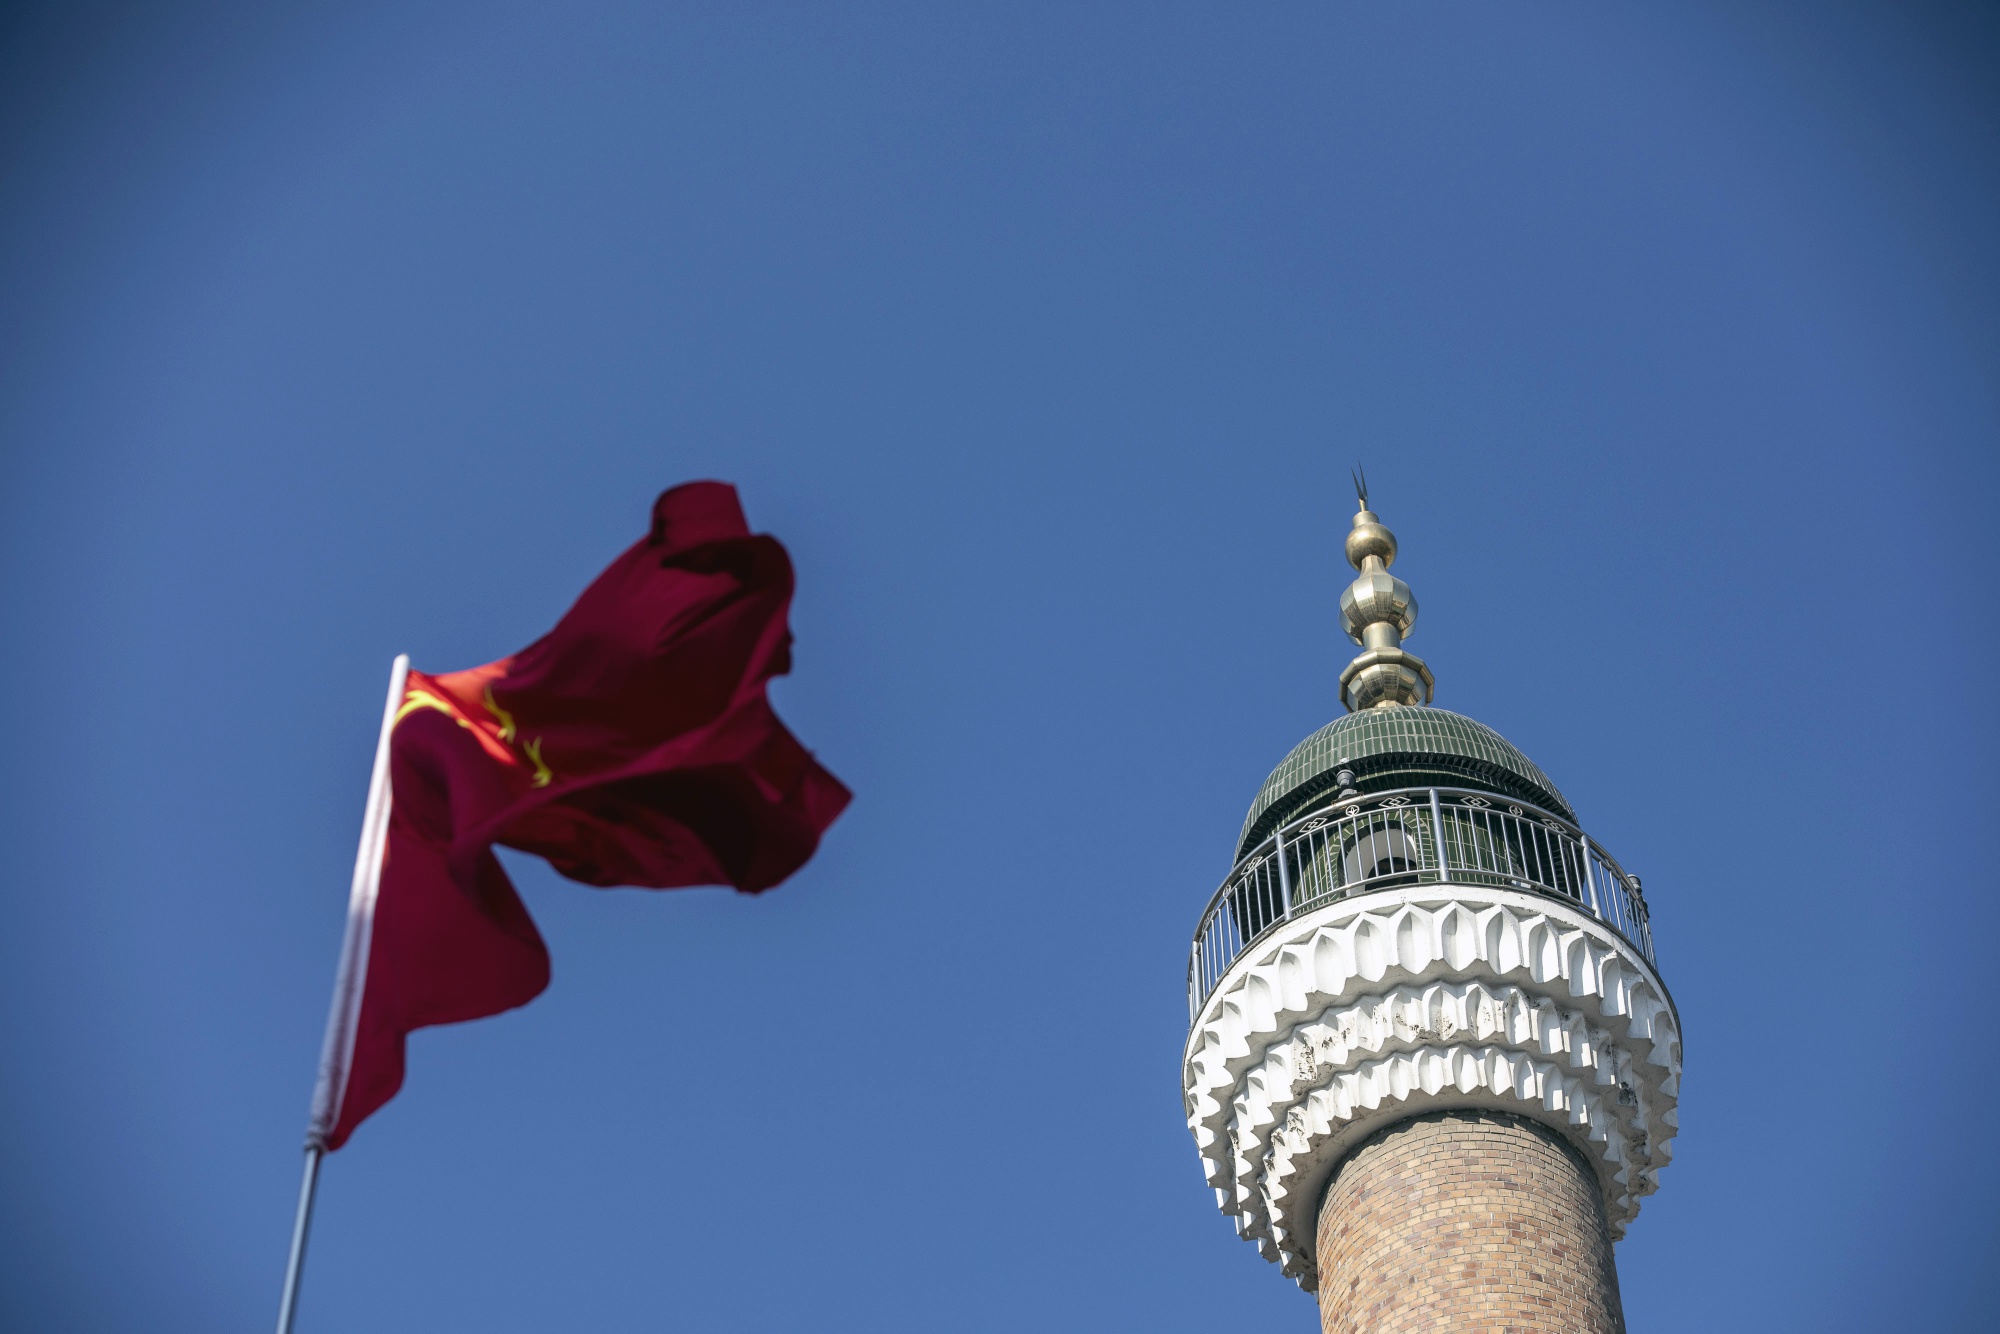 A Chinese flag flies in front of a mosque in Urumqi, capital of the northwestern province of Xinjiang.